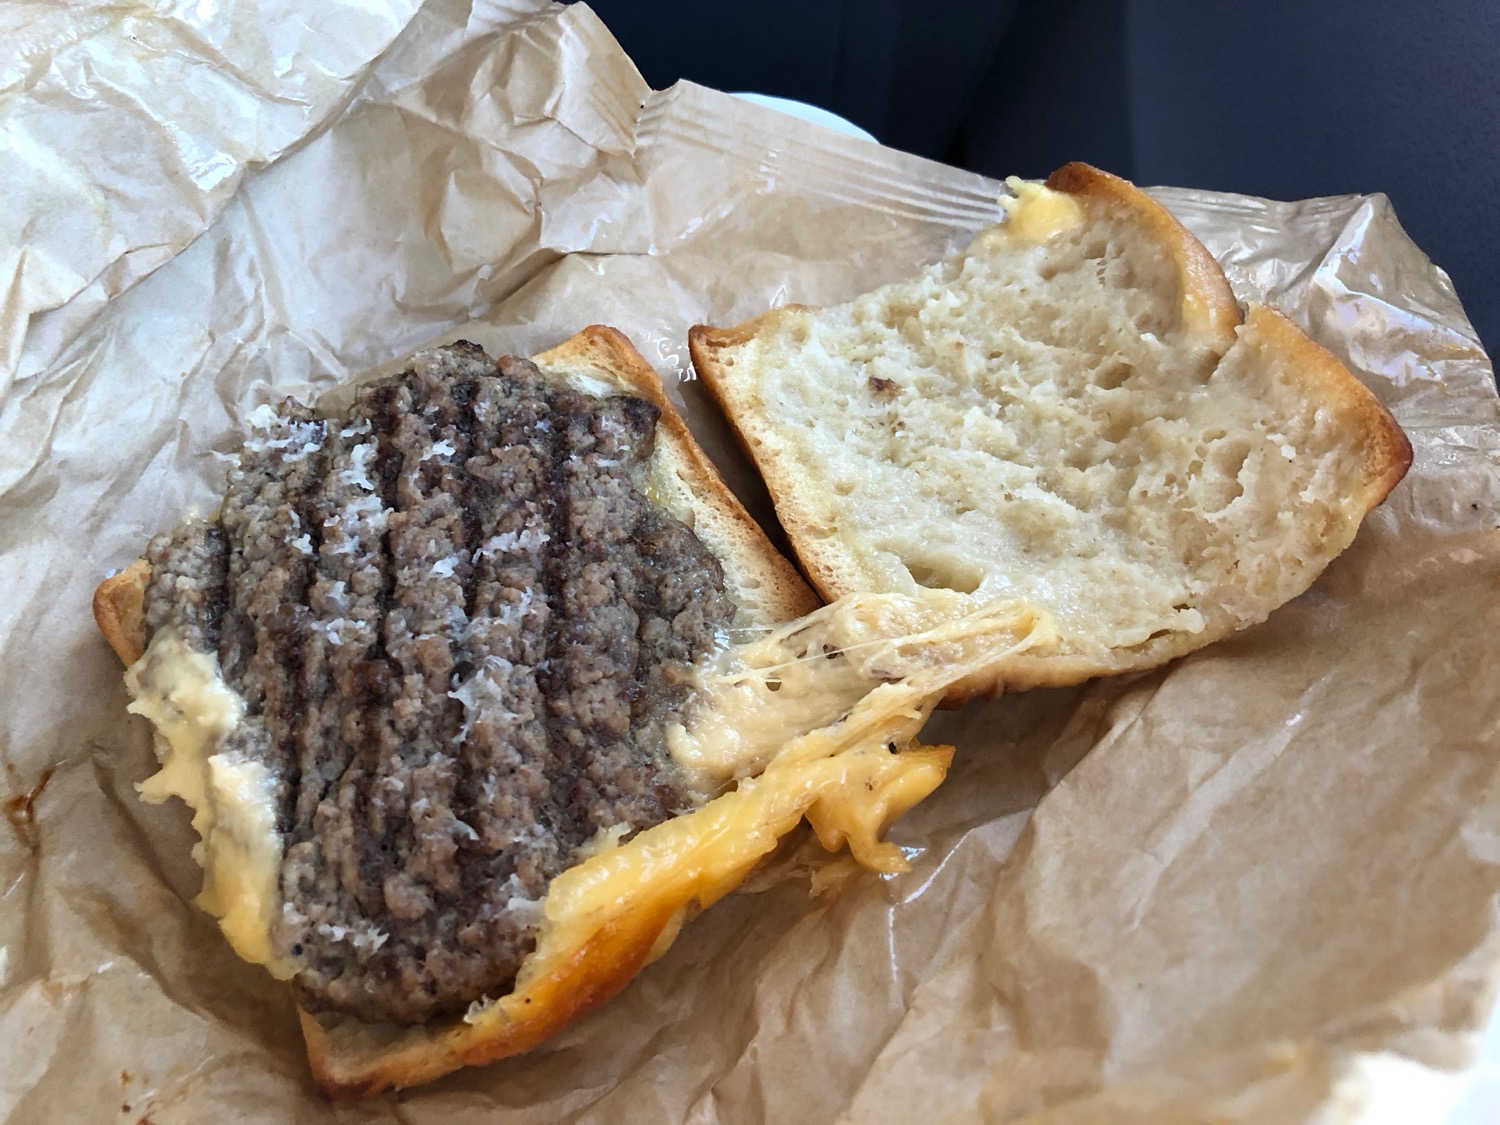 a burger cut in half on a brown paper